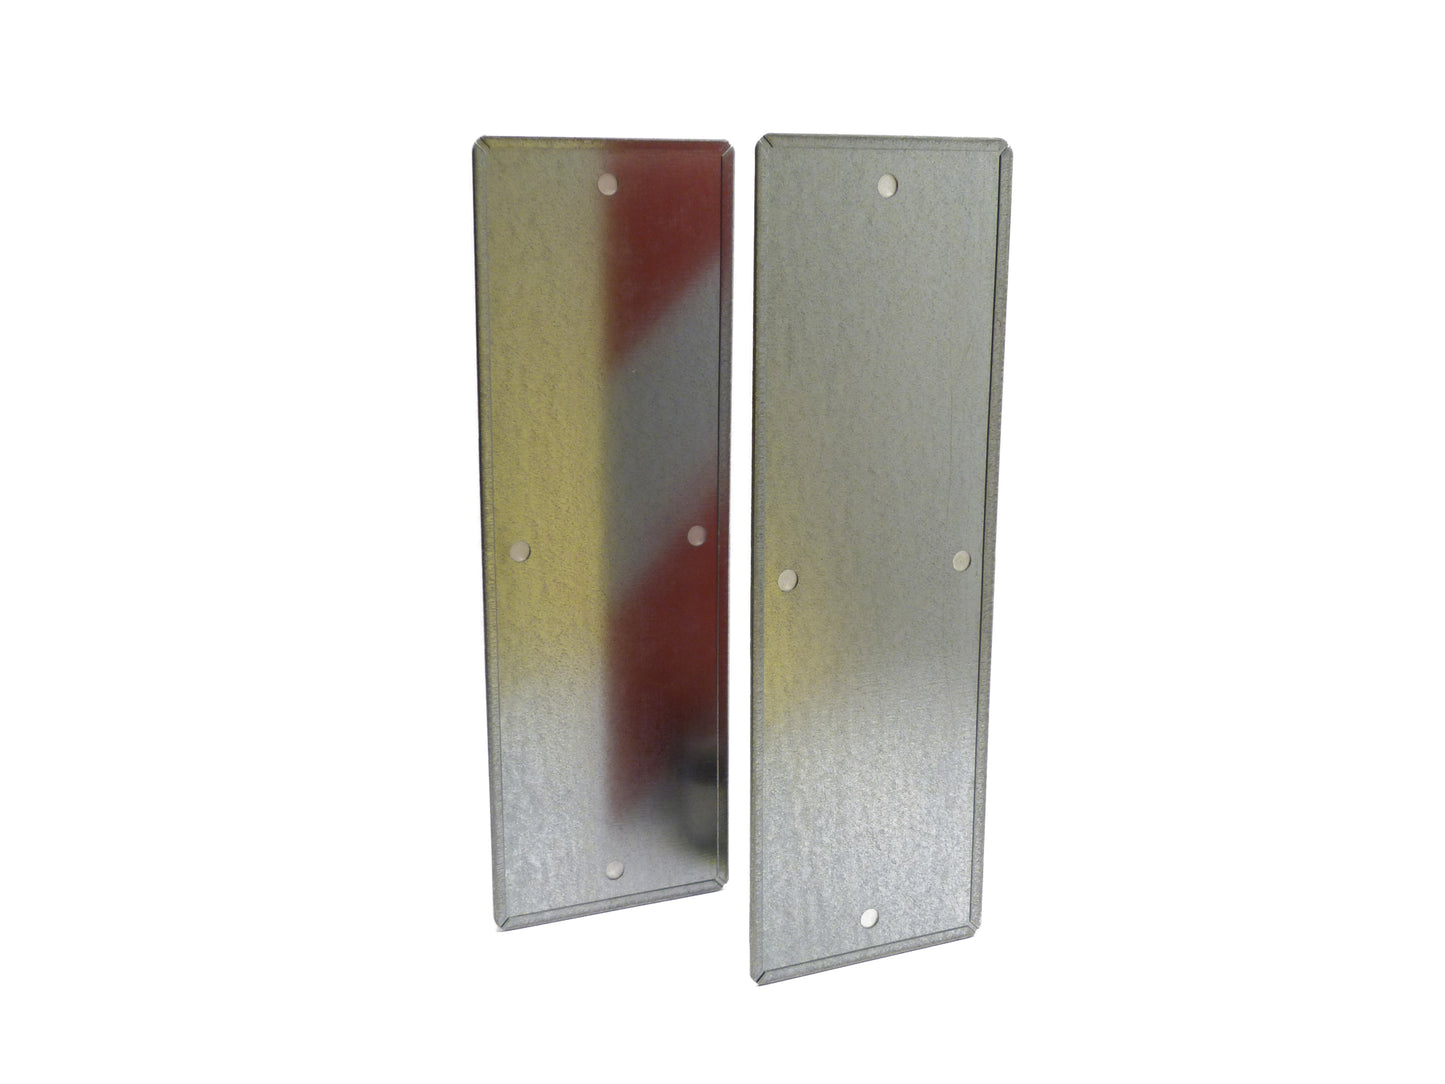 Reflective panel set 423mm x 141mm one side.